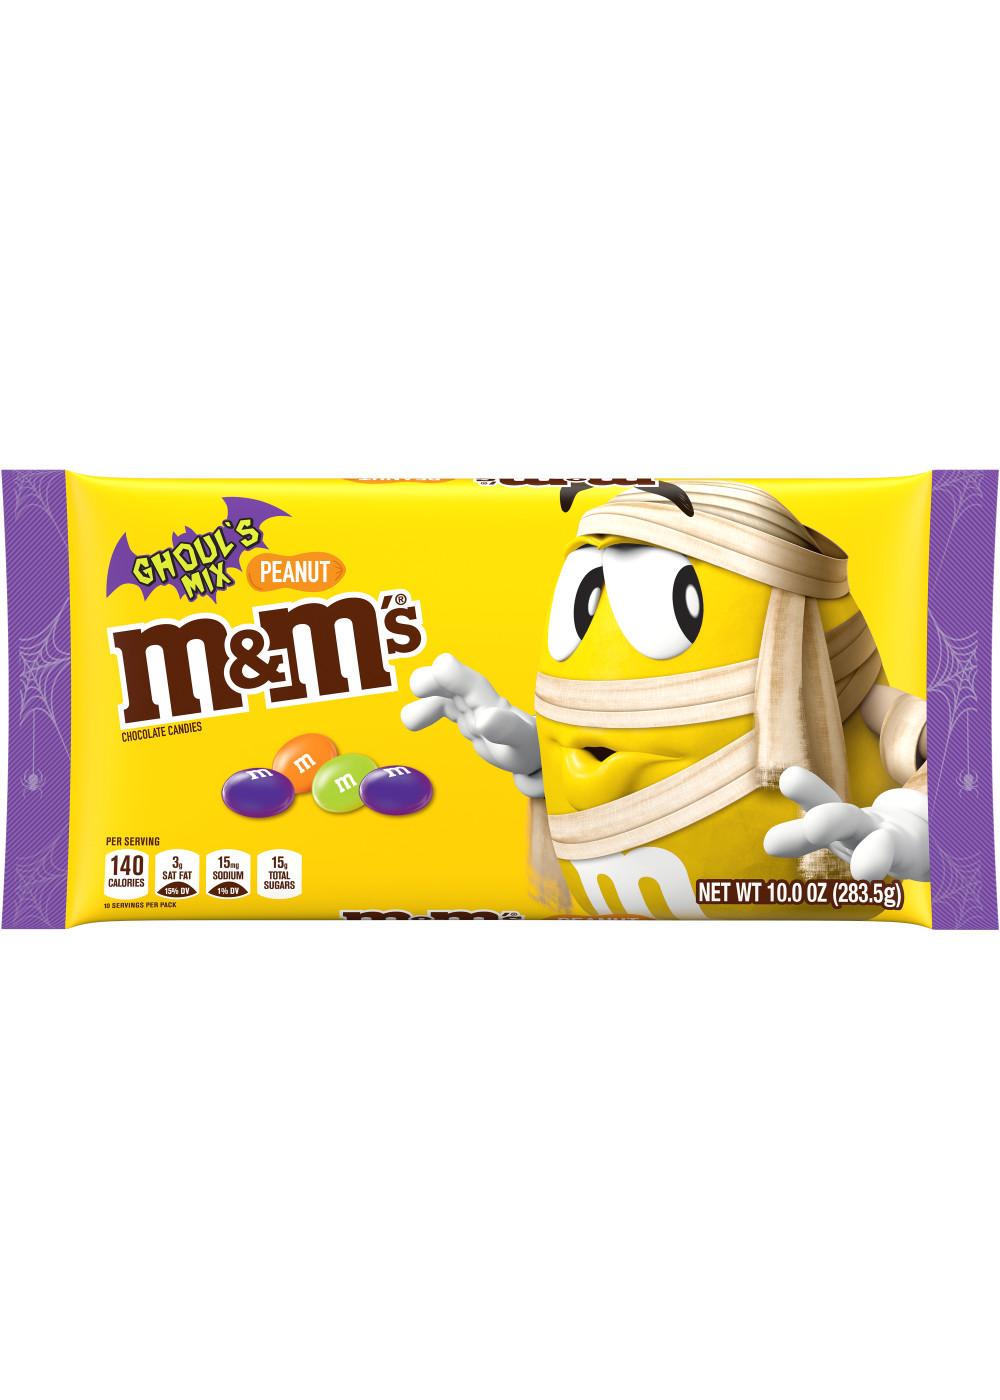 Halloween Ghoul's Mix Peanut M&M's Limited Edition